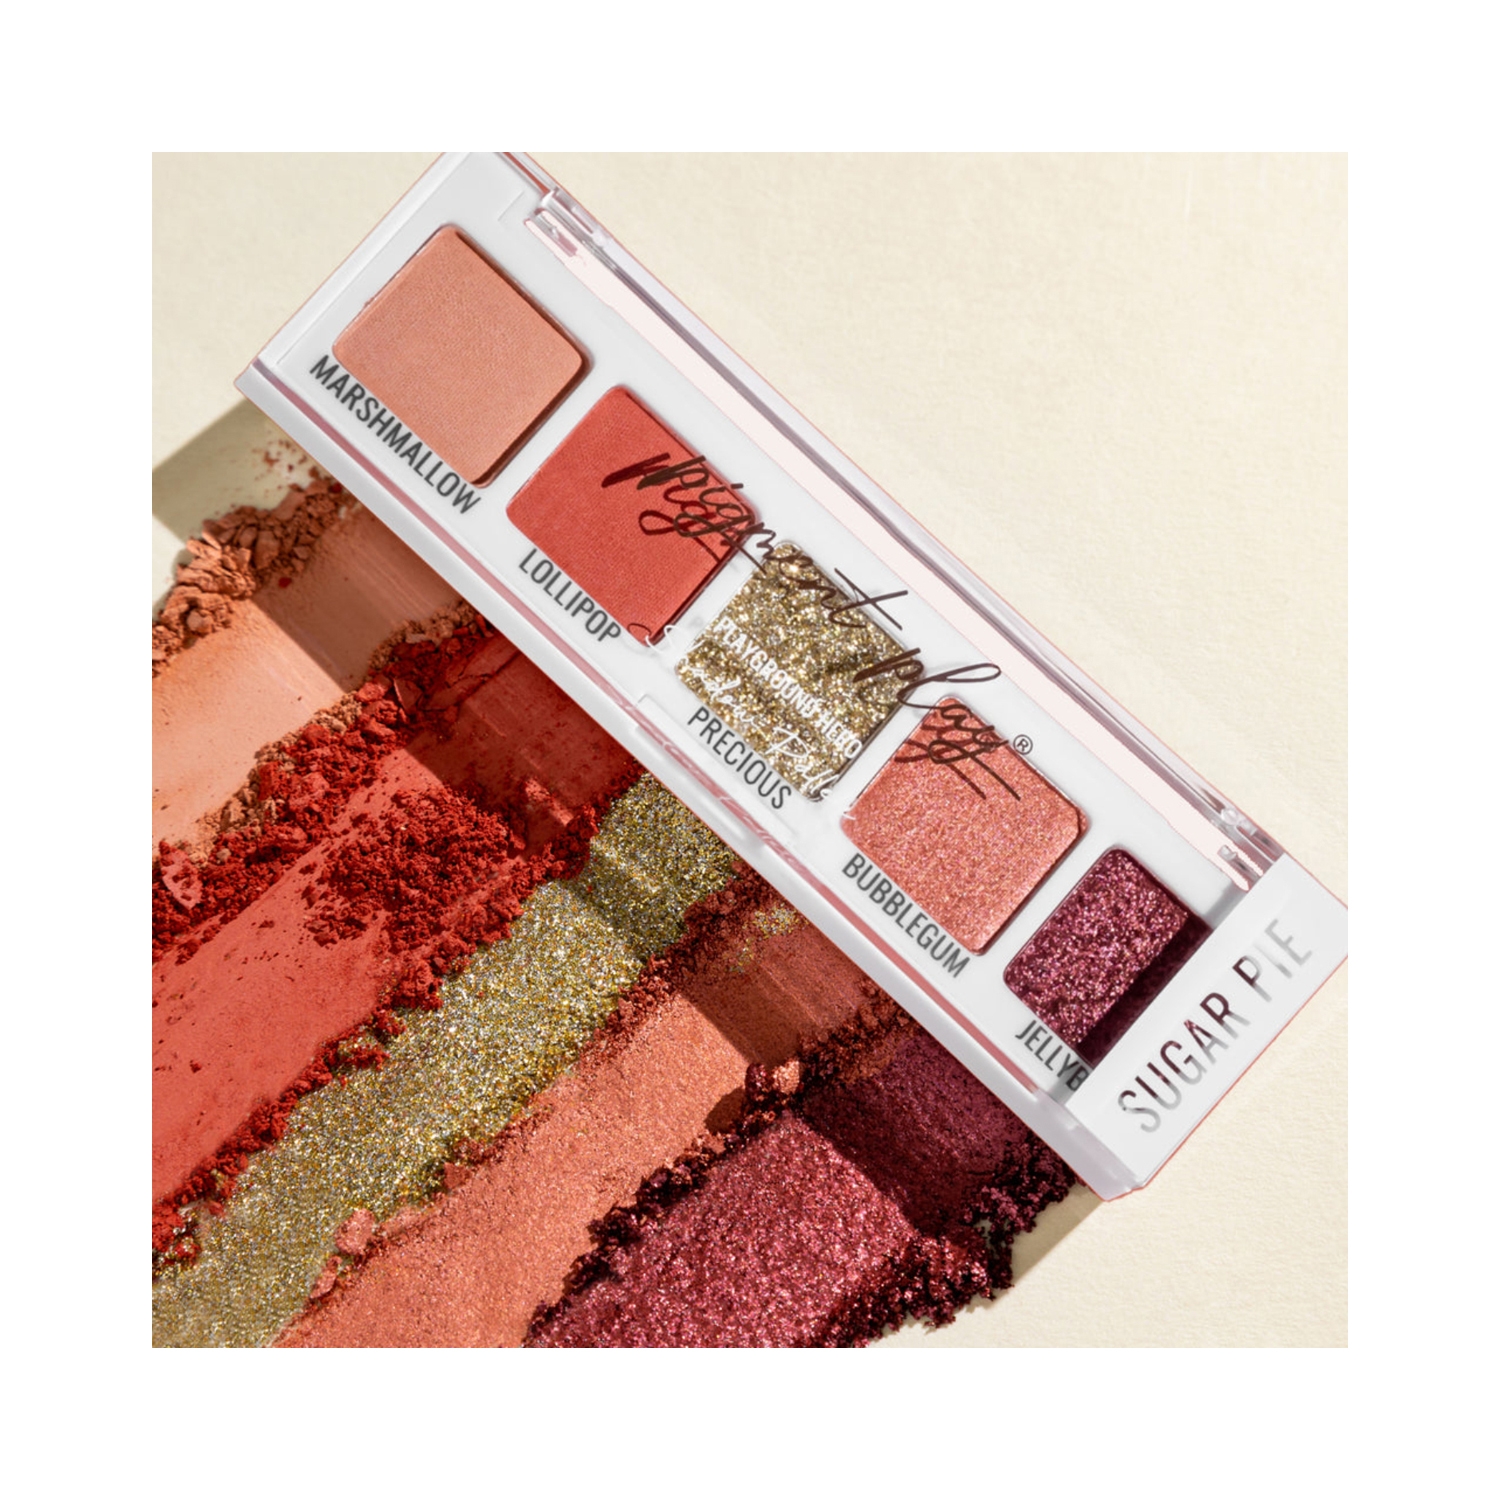 Pigment Play | Pigment Play Sugar & Spice Shadow Palette - Suger Pie (4.5g)